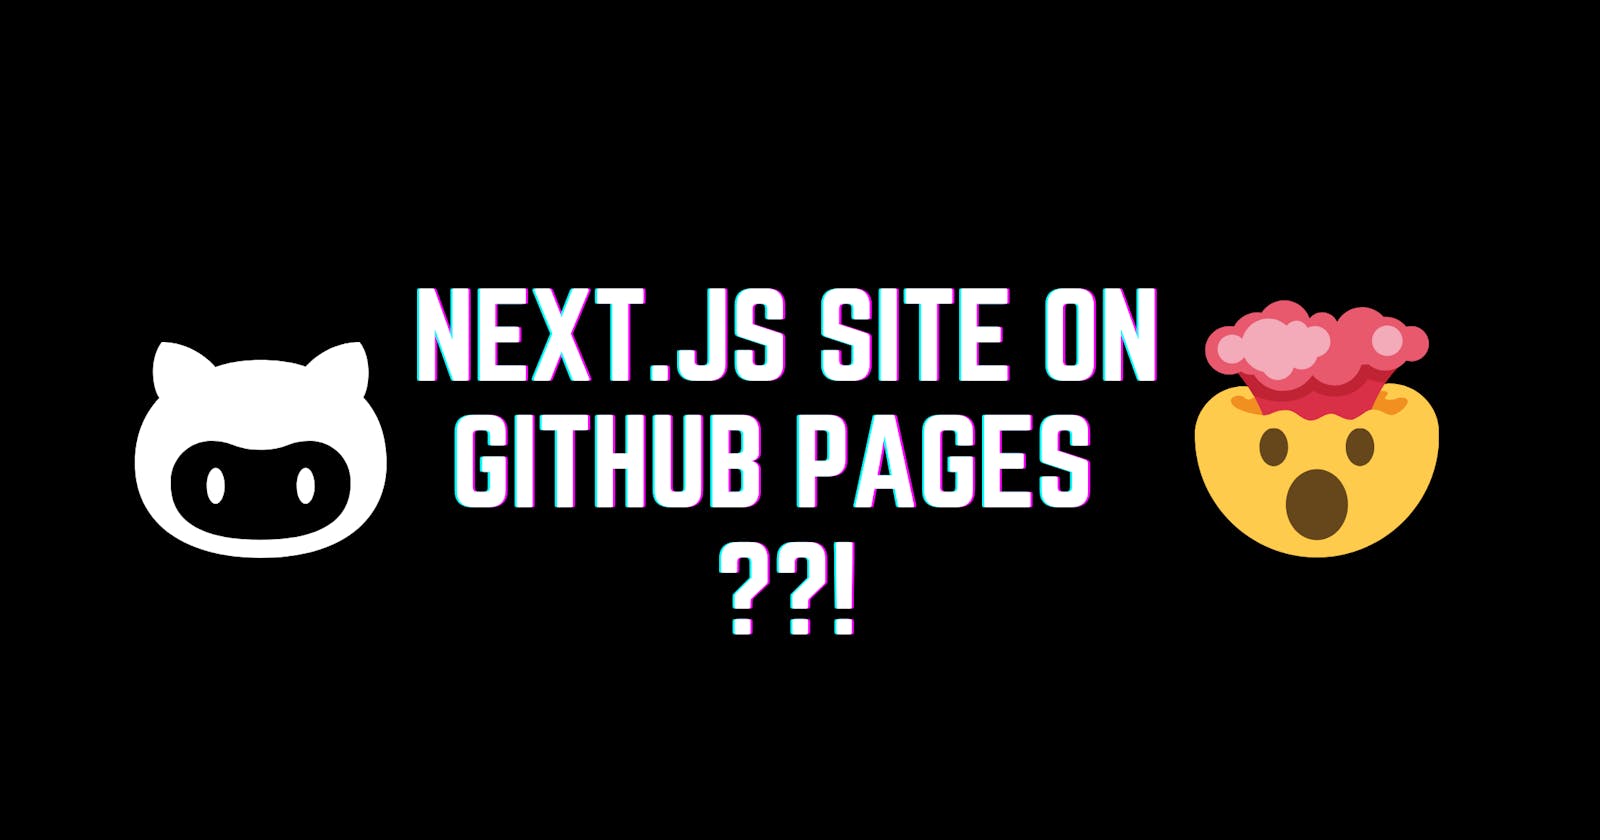 How to host a Hugo or Next.js site on GitHub Pages